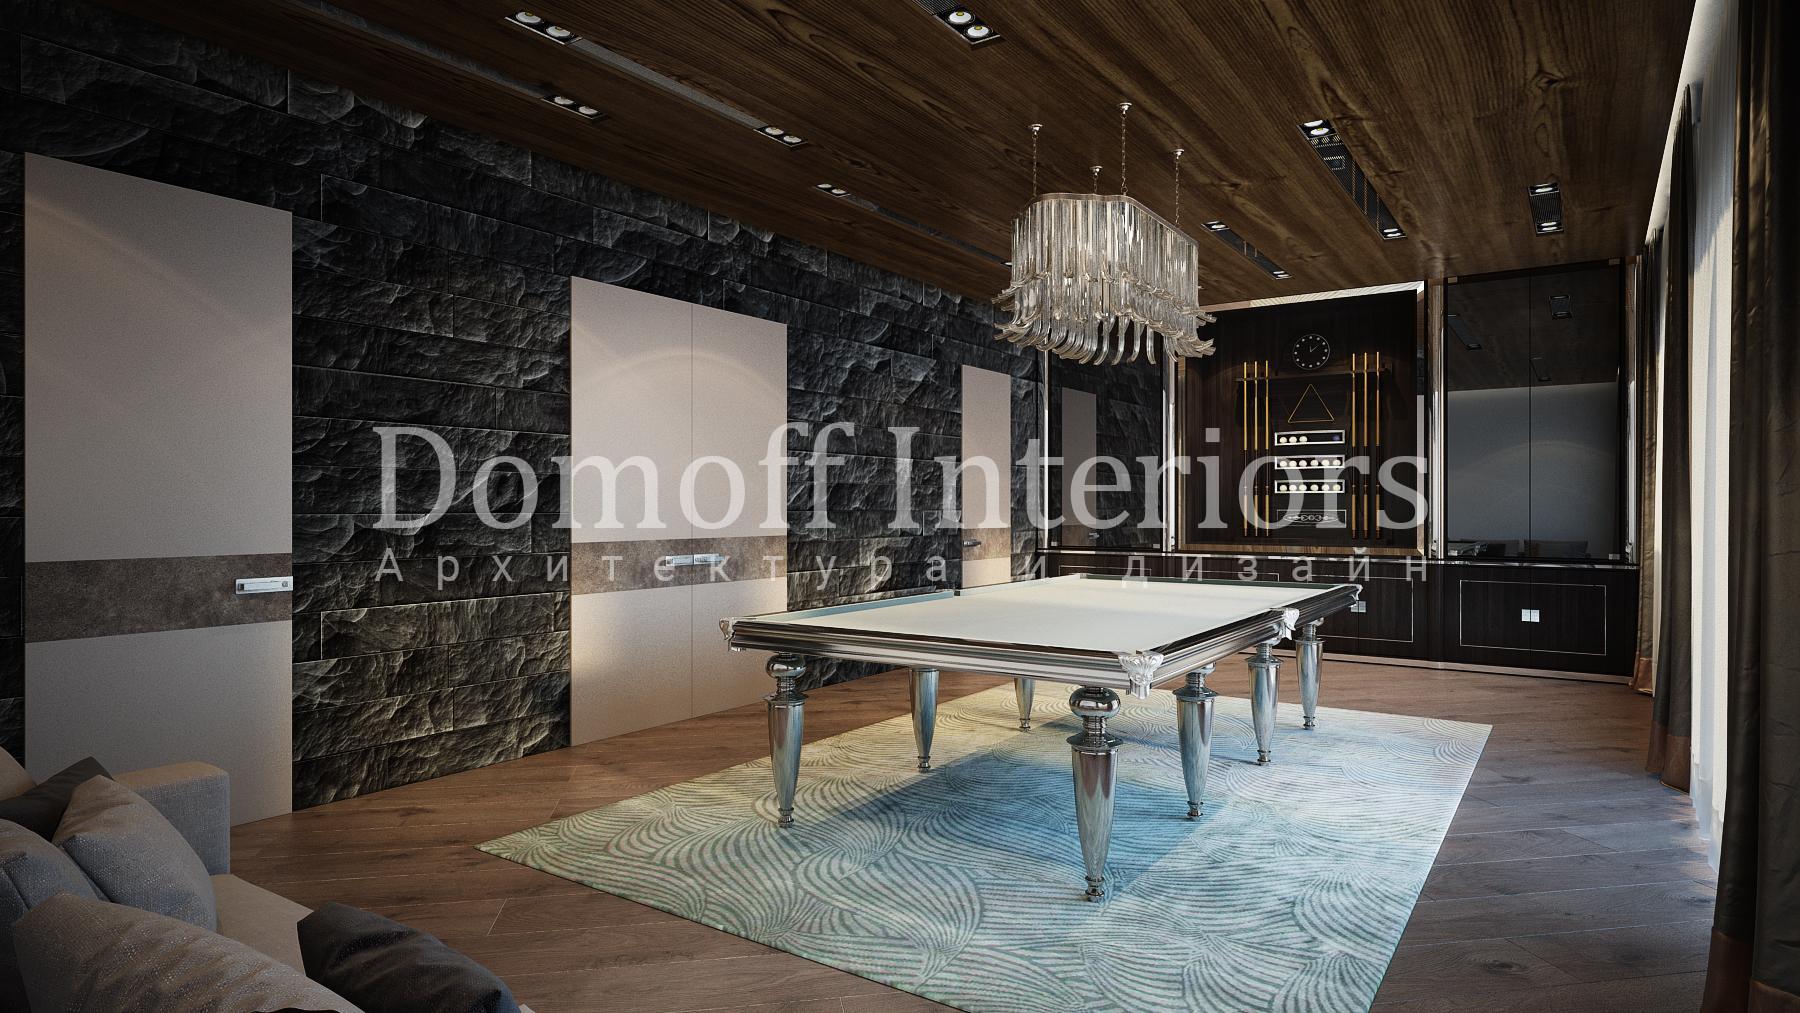 Billiard room made in the style of Contemporary Eclecticism